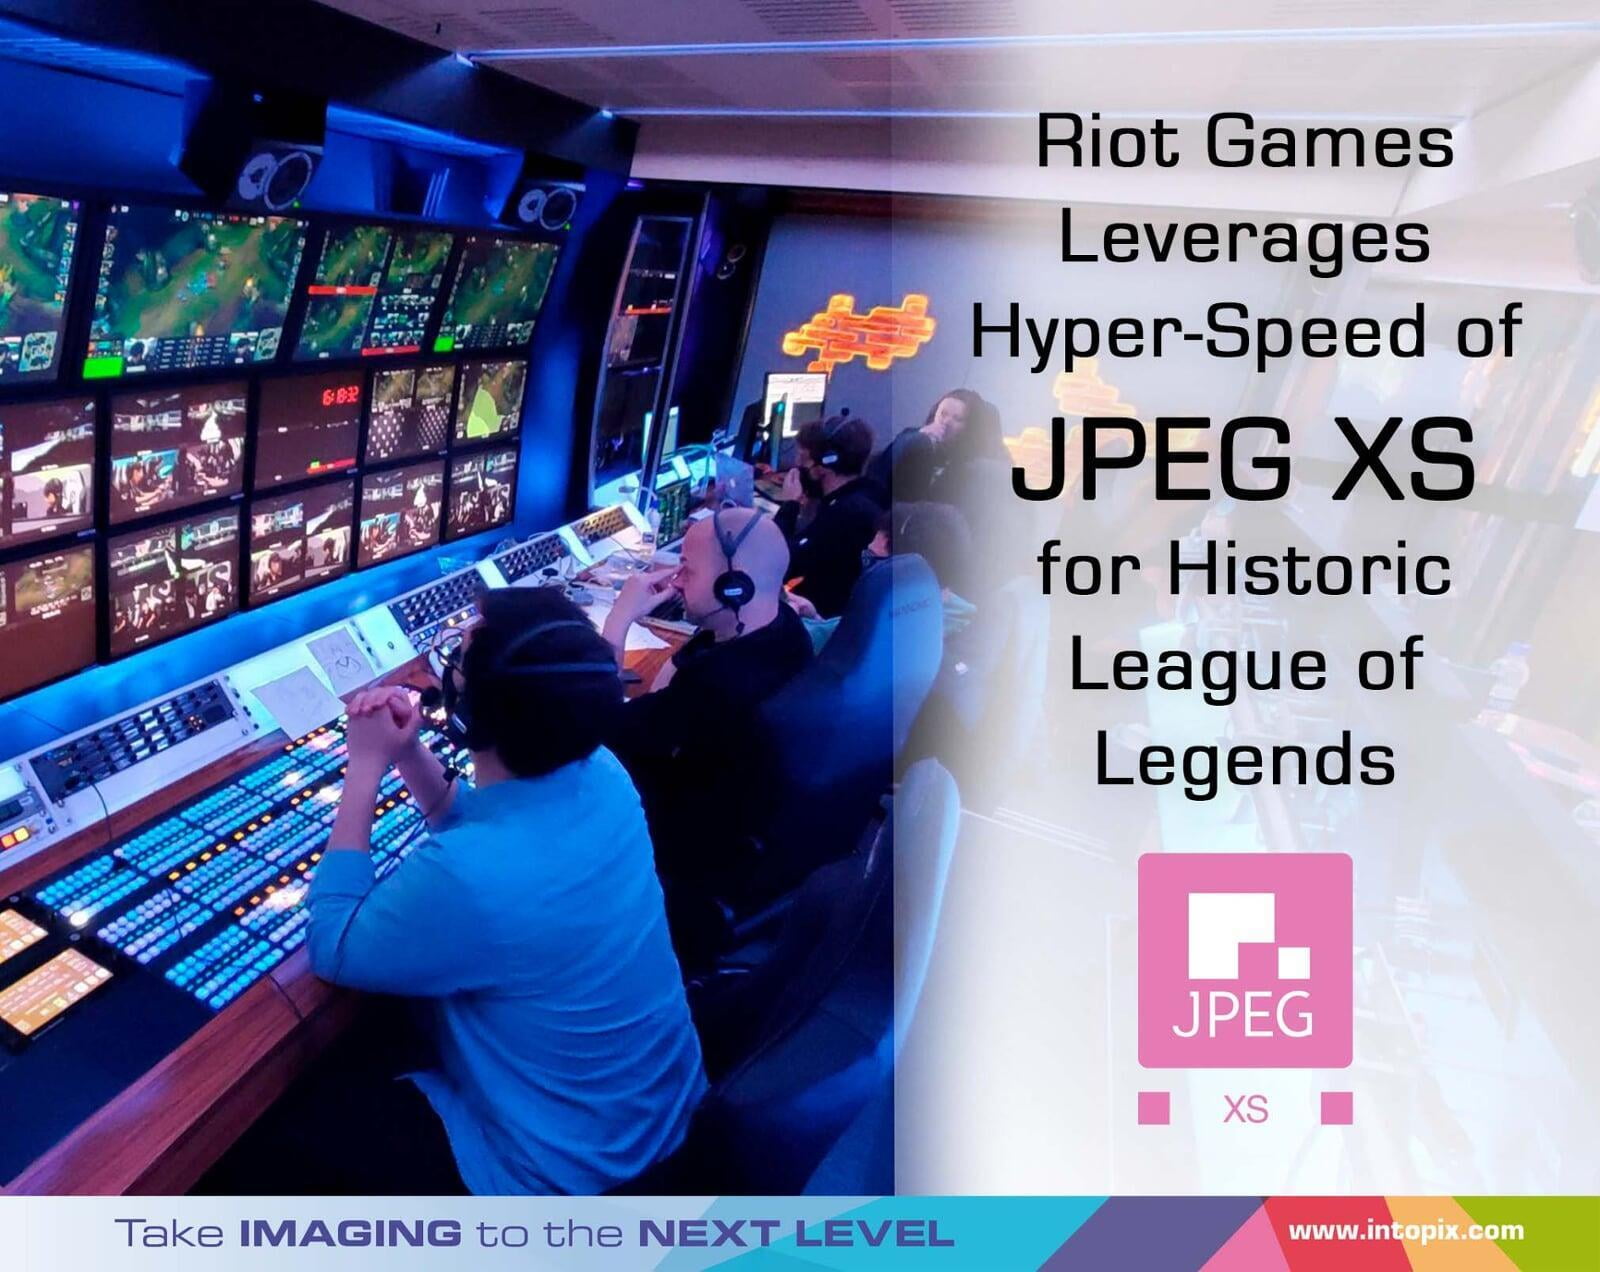 Riot Games Leverages Hyper-Speed of JPEG XS for Historic League of Legends, Valorant Events in Iceland